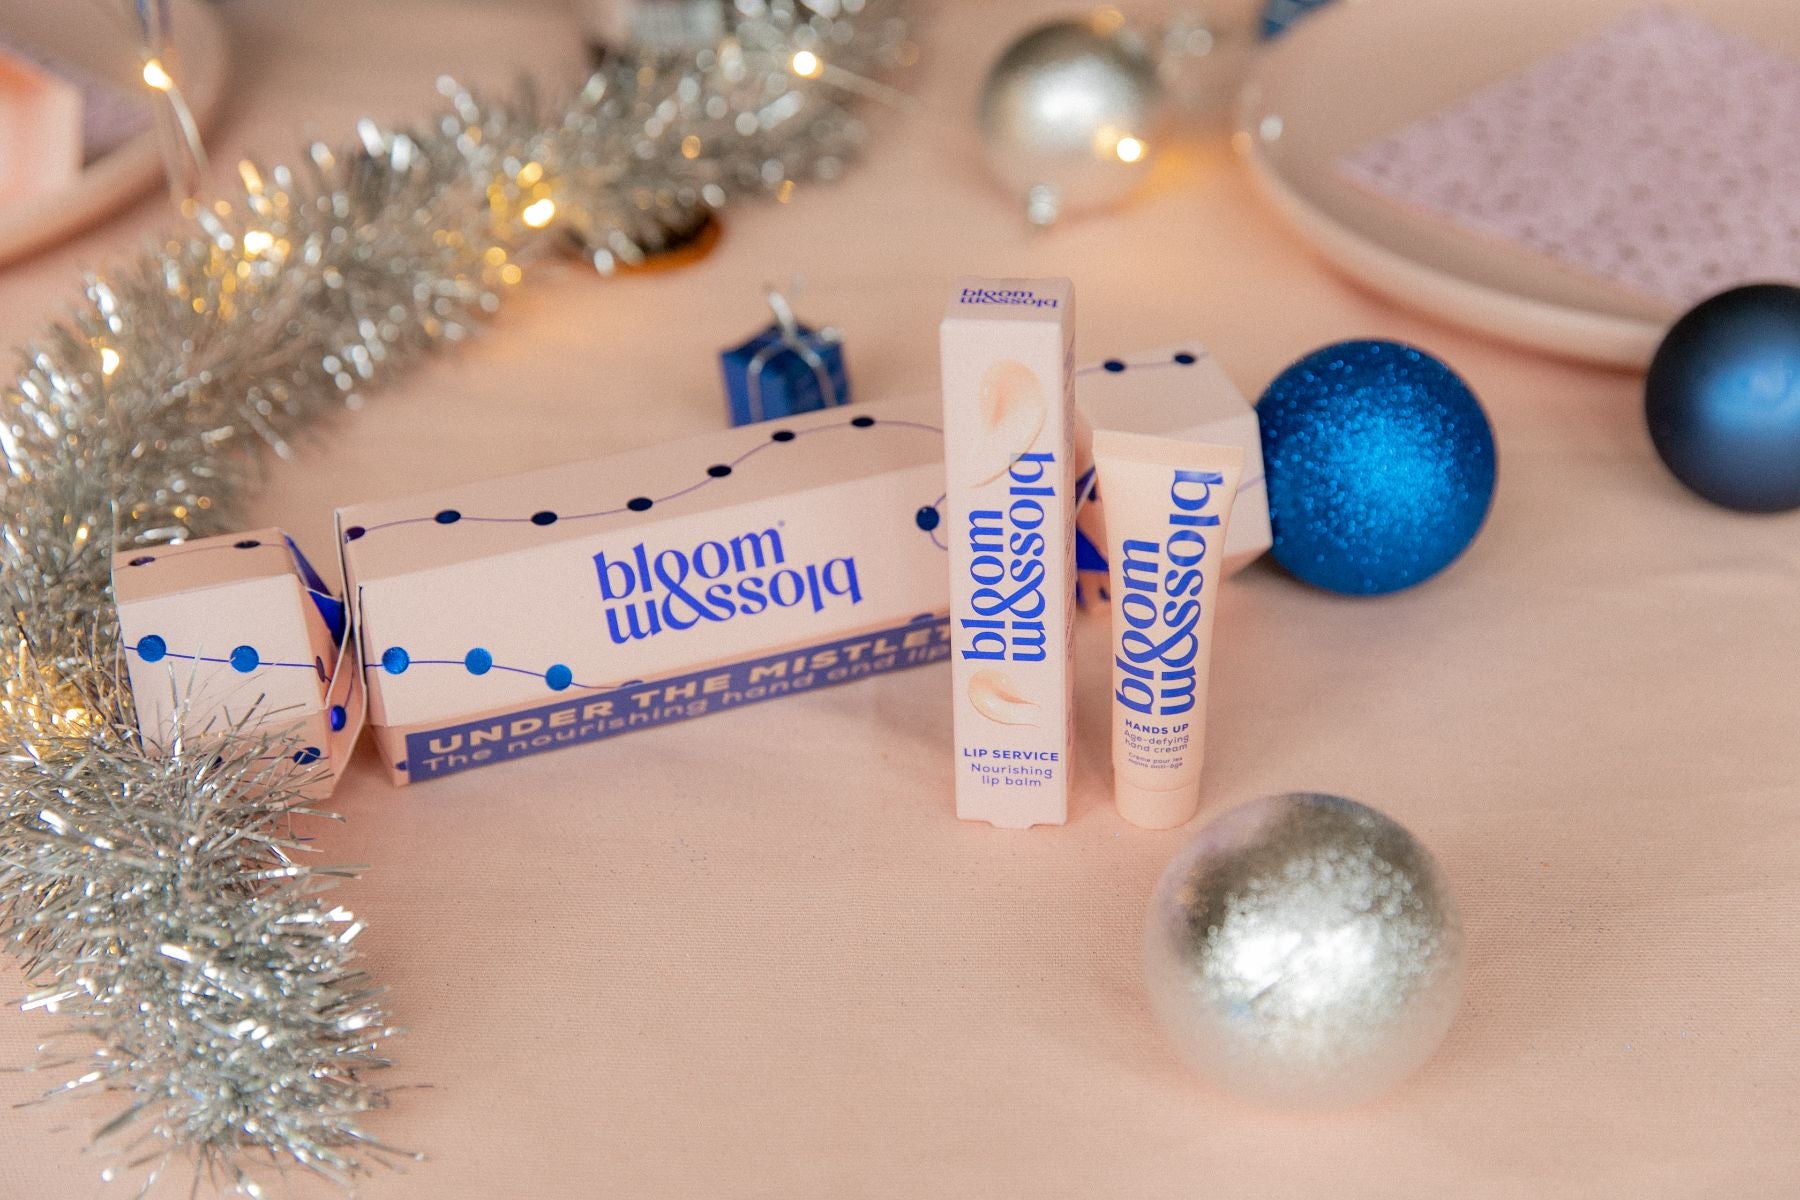 Under The Mistletoe beauty Christmas cracker with beauty products.